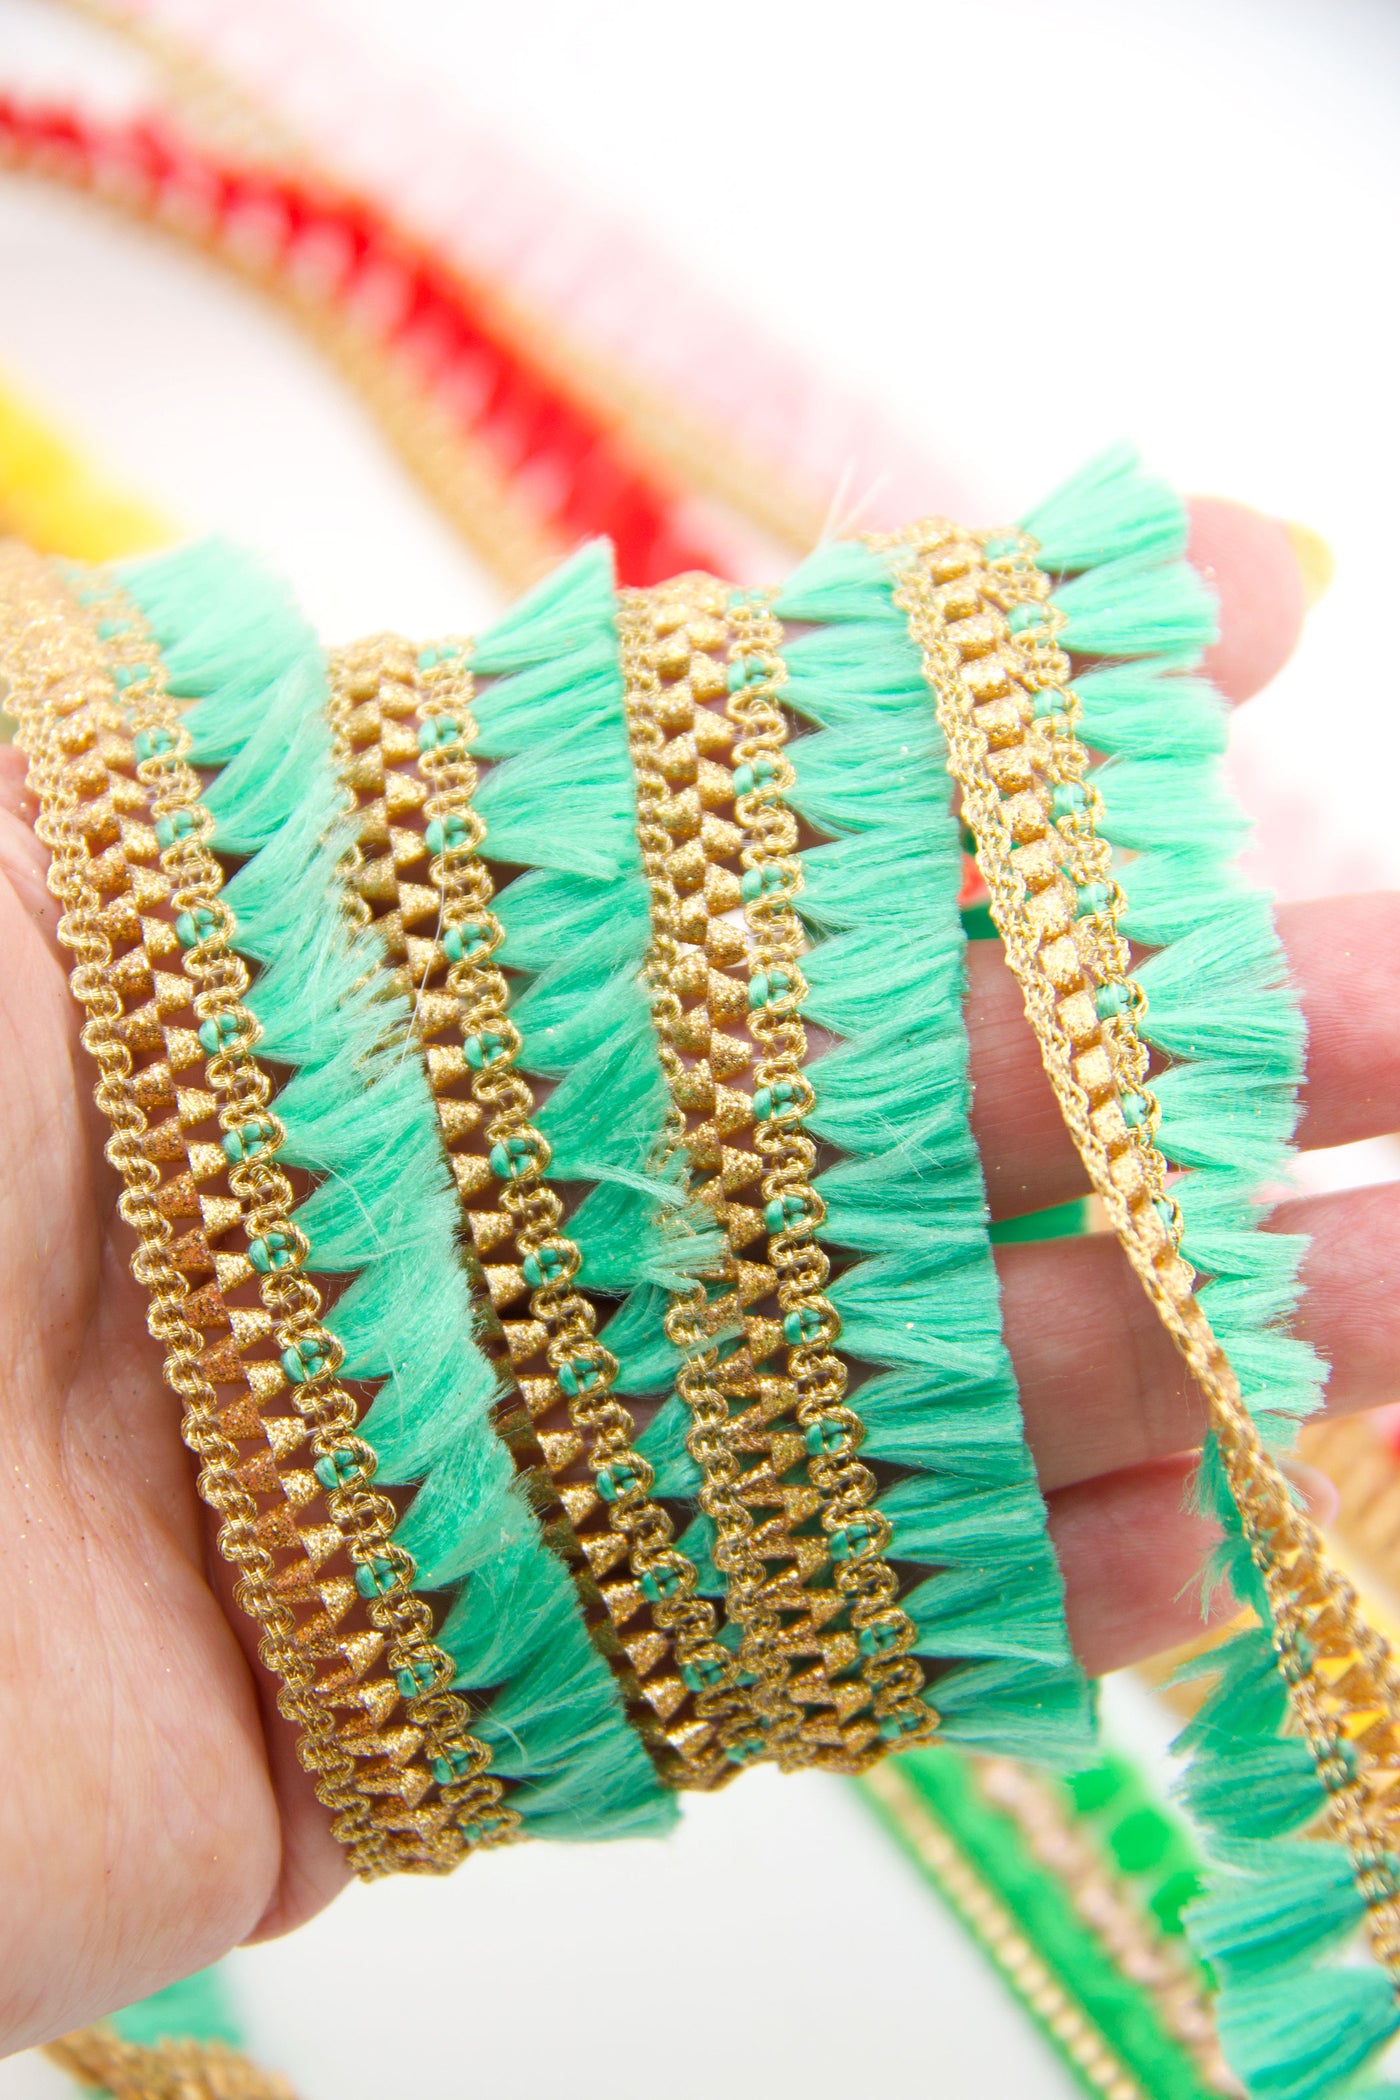 Mint Skinny Indian Ribbon, Holiday Craft or Jewelry Supplies, Tassels and trim, all in one